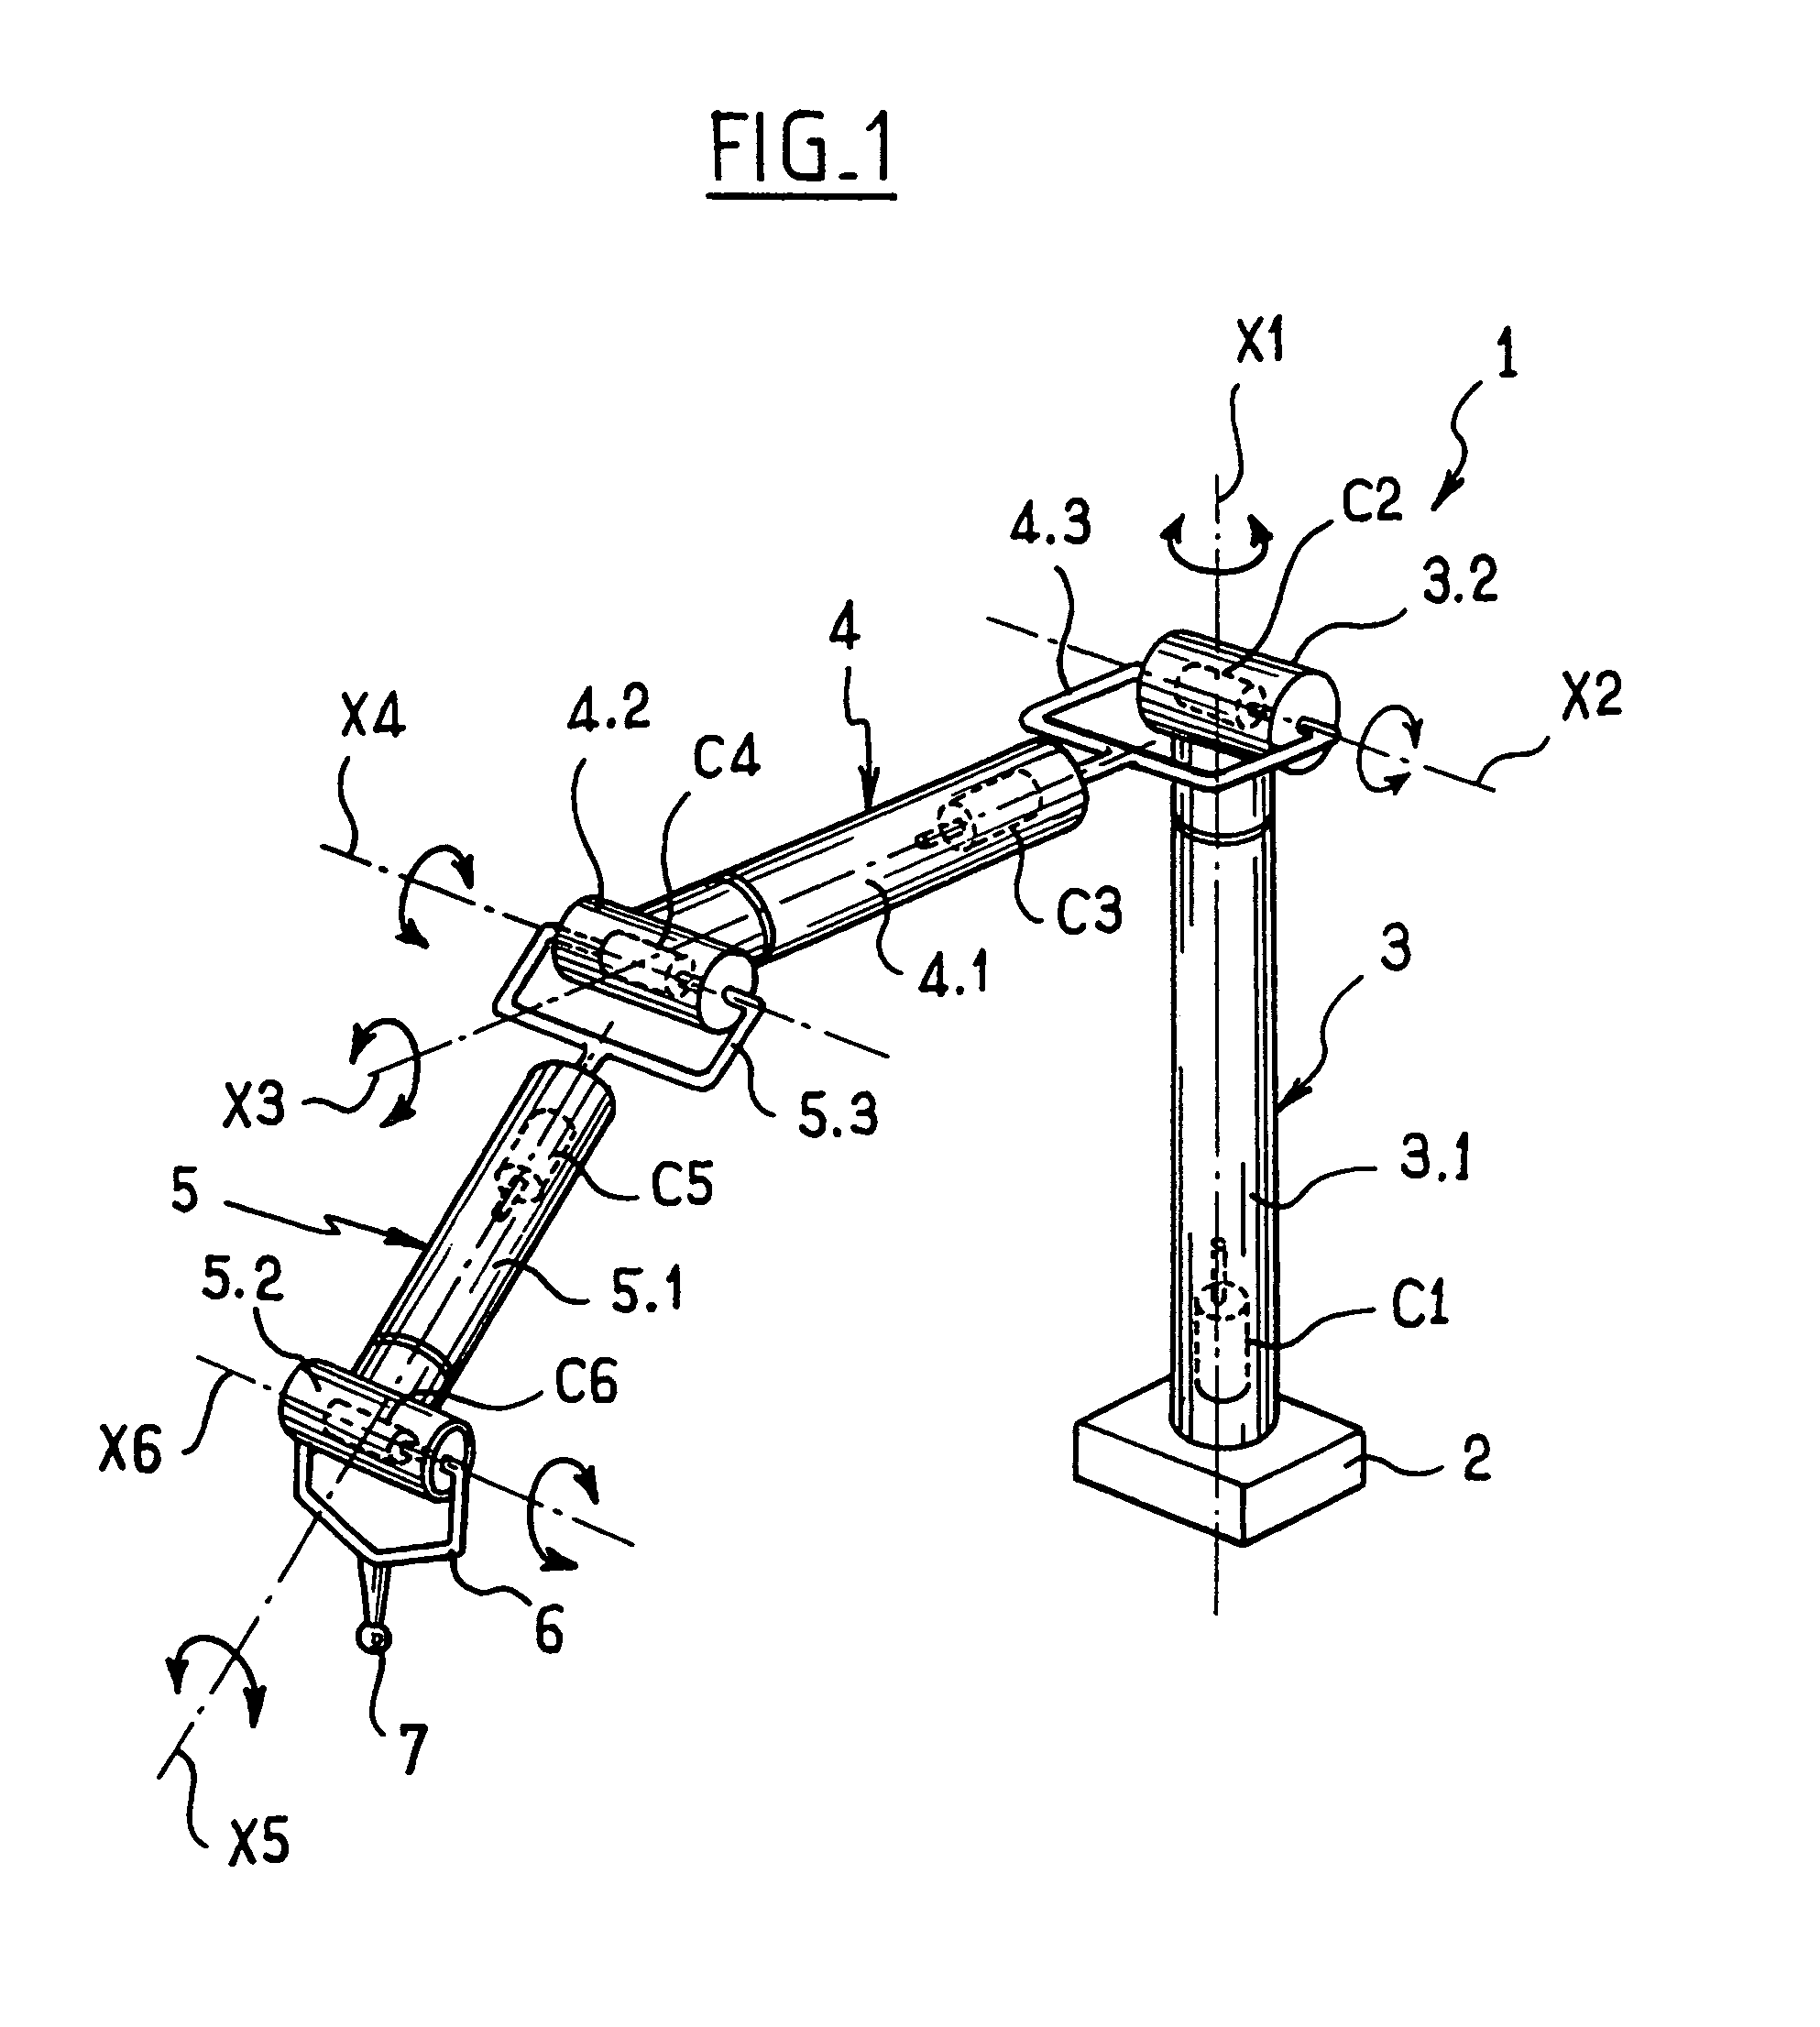 Connection device associated with an arm of an articulated three-dimensional measuring appliance